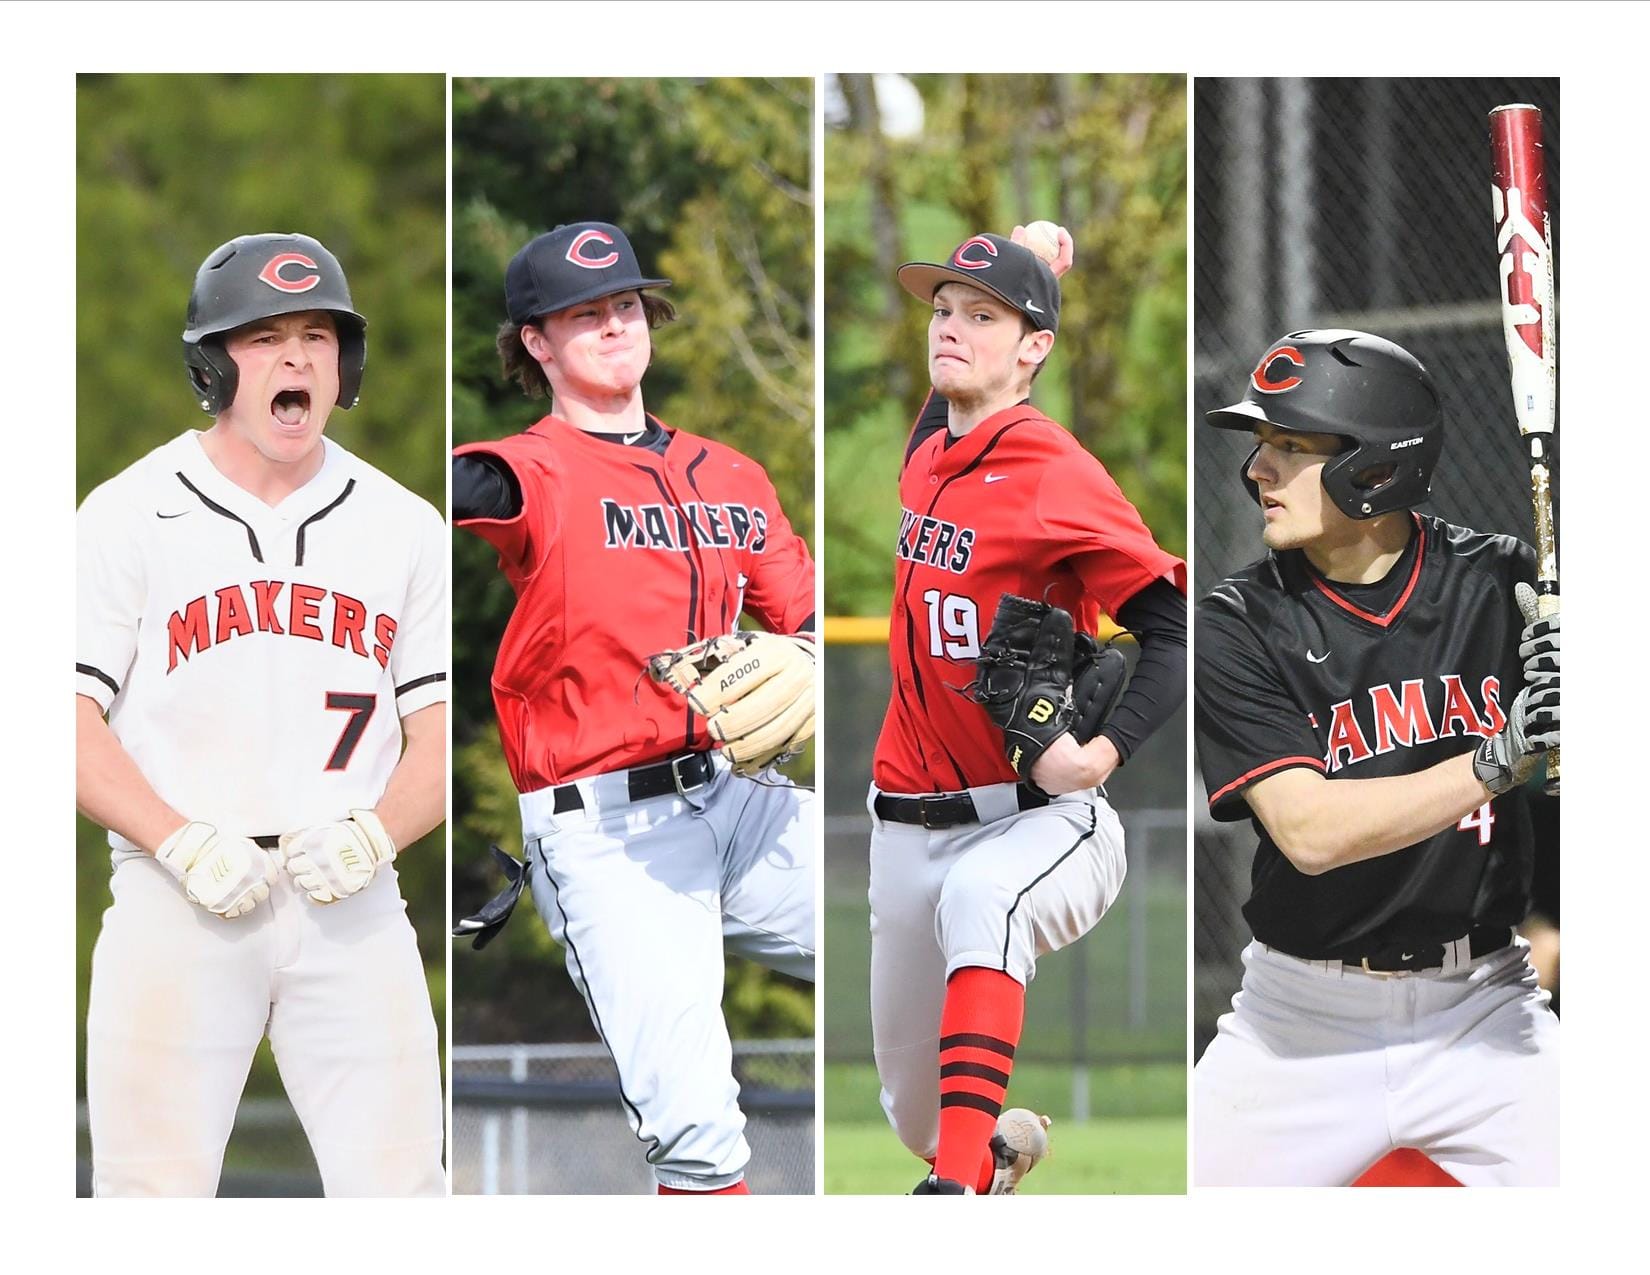 From left, Tyler Forner, Kolby Broadbent, Riley Sinclair and Gideon Malychewski are all members of the 2020 Camas High School baseball team who played on the 2015 Camas-Washougal Babe Ruth team that advanced to the World Series (Photos courtesy of Kris Cavin)